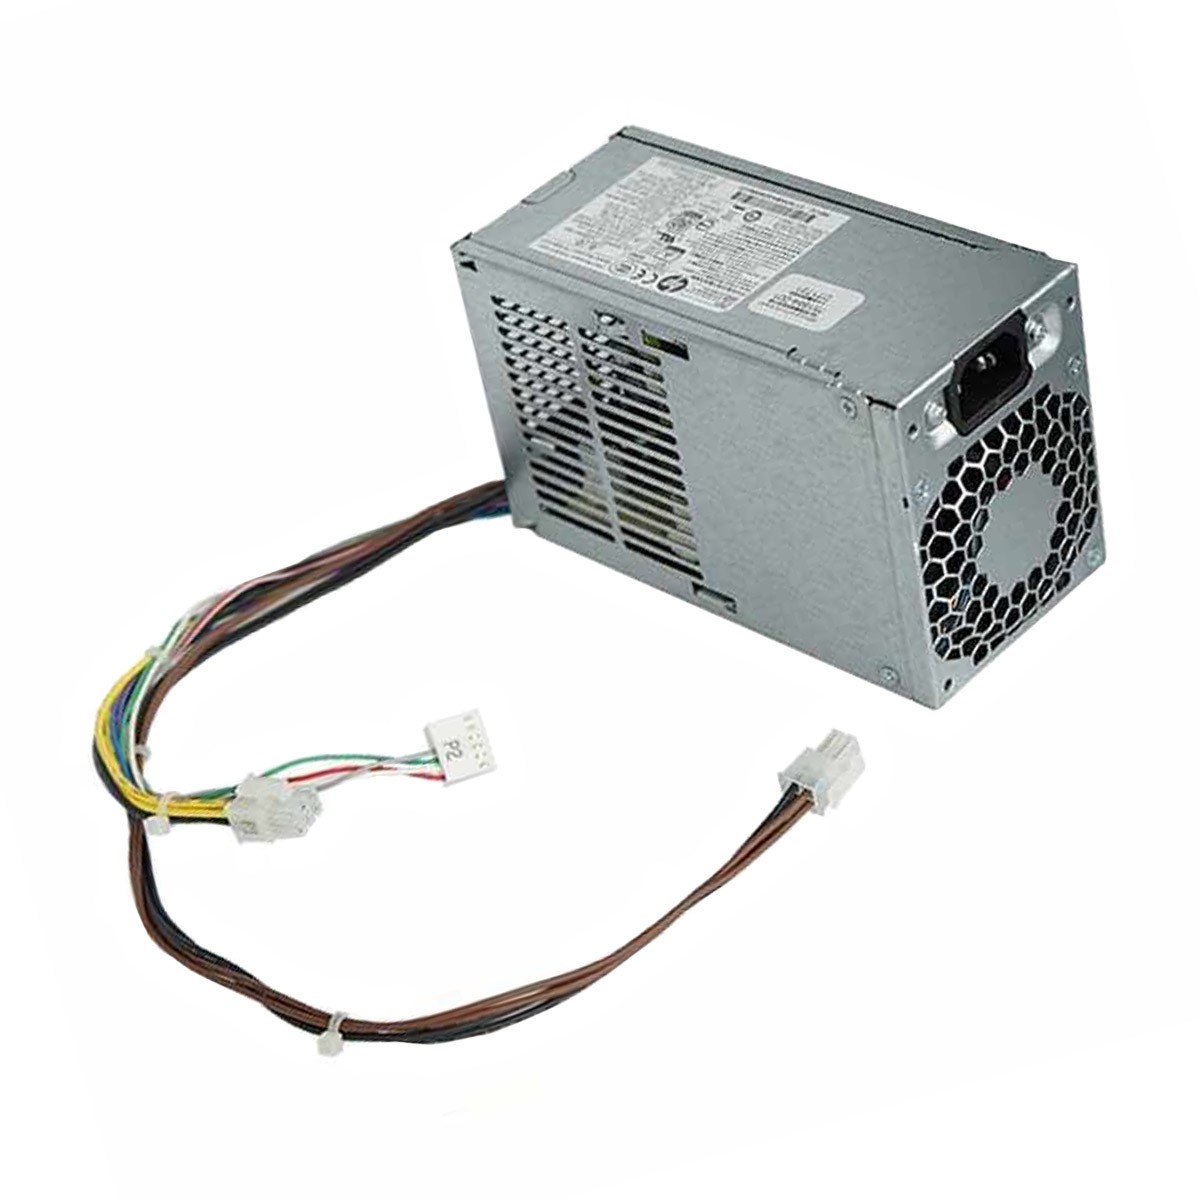 Alimentation PC occasion - HP DPS-240TB A - 240W - Trade Discount